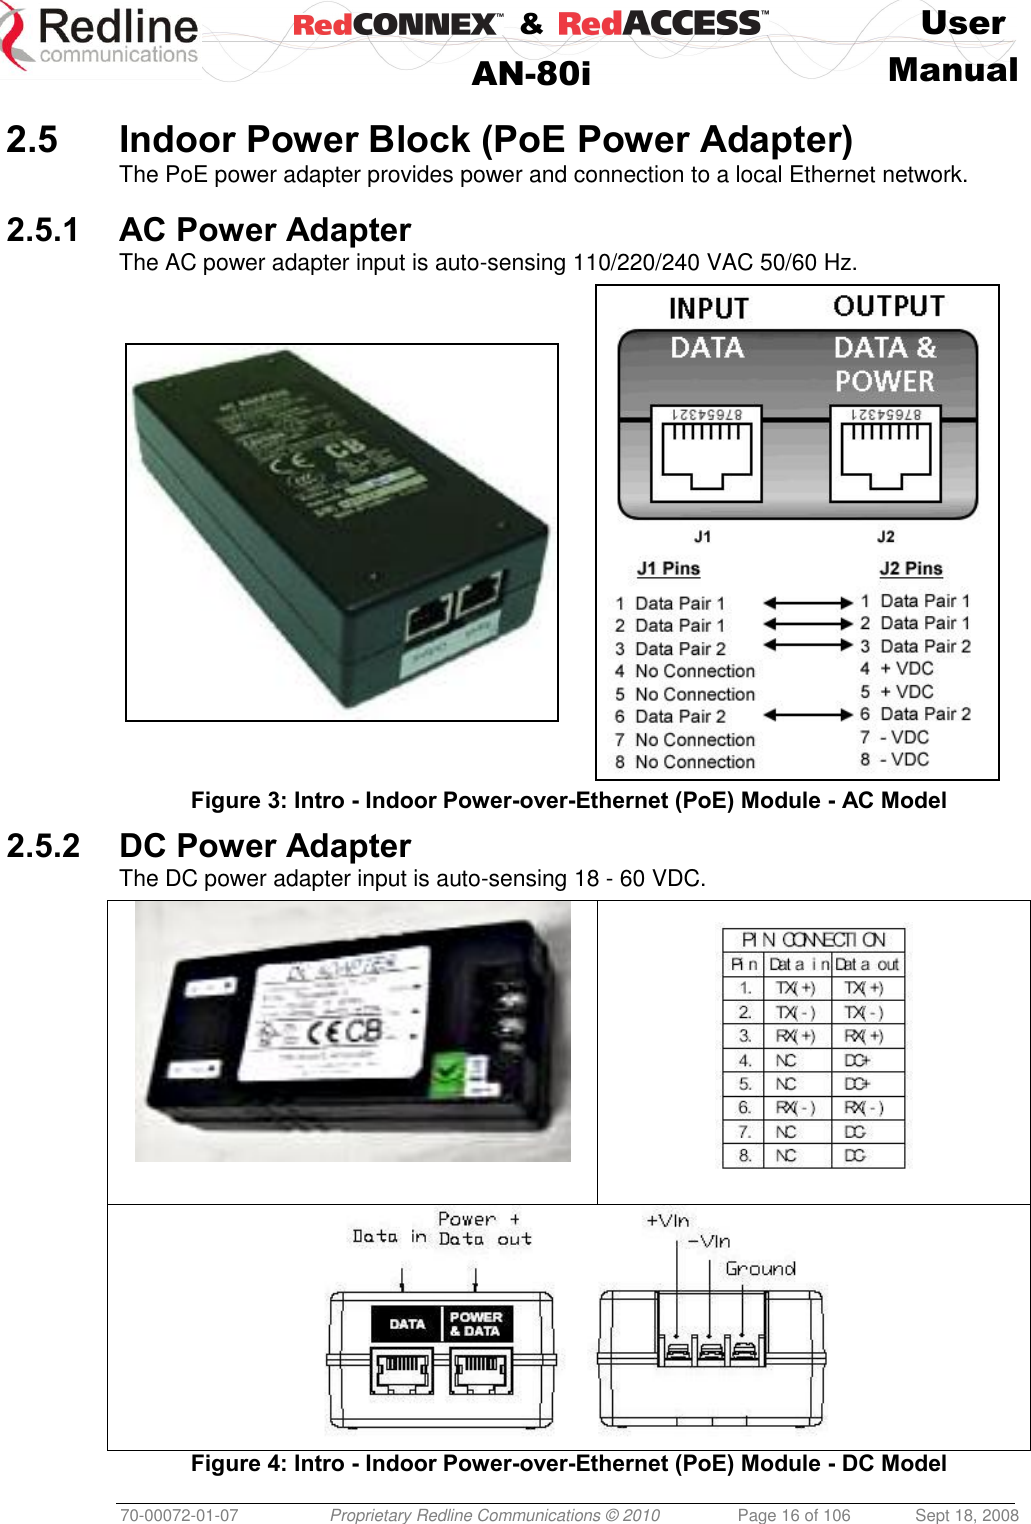    &amp;  User  AN-80i Manual  70-00072-01-07 Proprietary Redline Communications © 2010  Page 16 of 106  Sept 18, 2008  2.5 Indoor Power Block (PoE Power Adapter) The PoE power adapter provides power and connection to a local Ethernet network.  2.5.1 AC Power Adapter The AC power adapter input is auto-sensing 110/220/240 VAC 50/60 Hz.   Figure 3: Intro - Indoor Power-over-Ethernet (PoE) Module - AC Model 2.5.2 DC Power Adapter The DC power adapter input is auto-sensing 18 - 60 VDC.     Figure 4: Intro - Indoor Power-over-Ethernet (PoE) Module - DC Model 